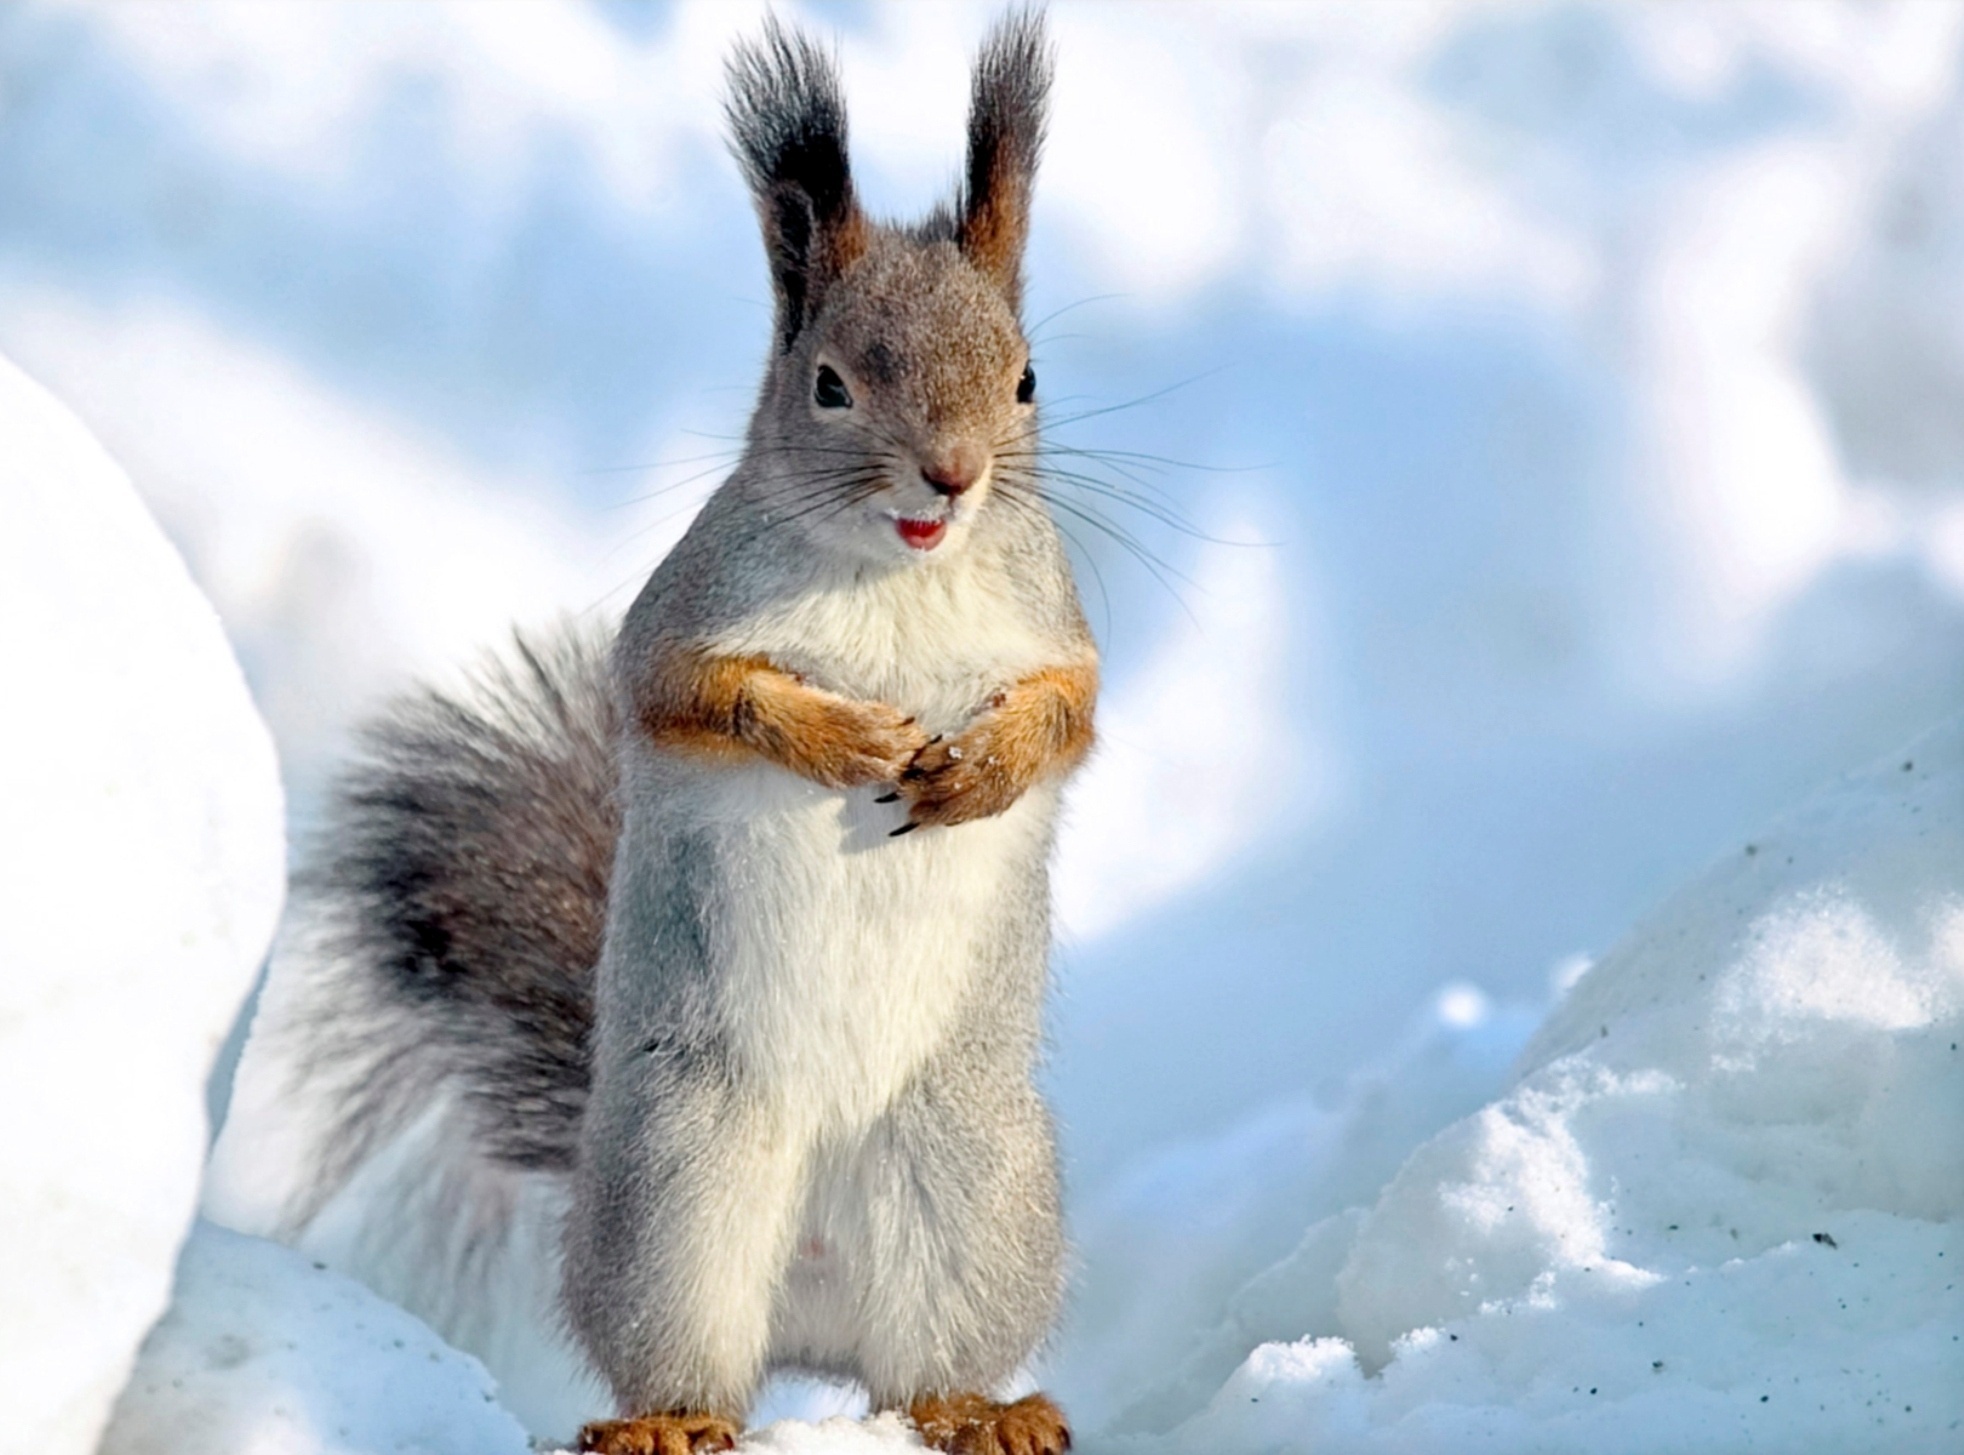 Cool Backgrounds animals, squirrel, winter, snow Animal